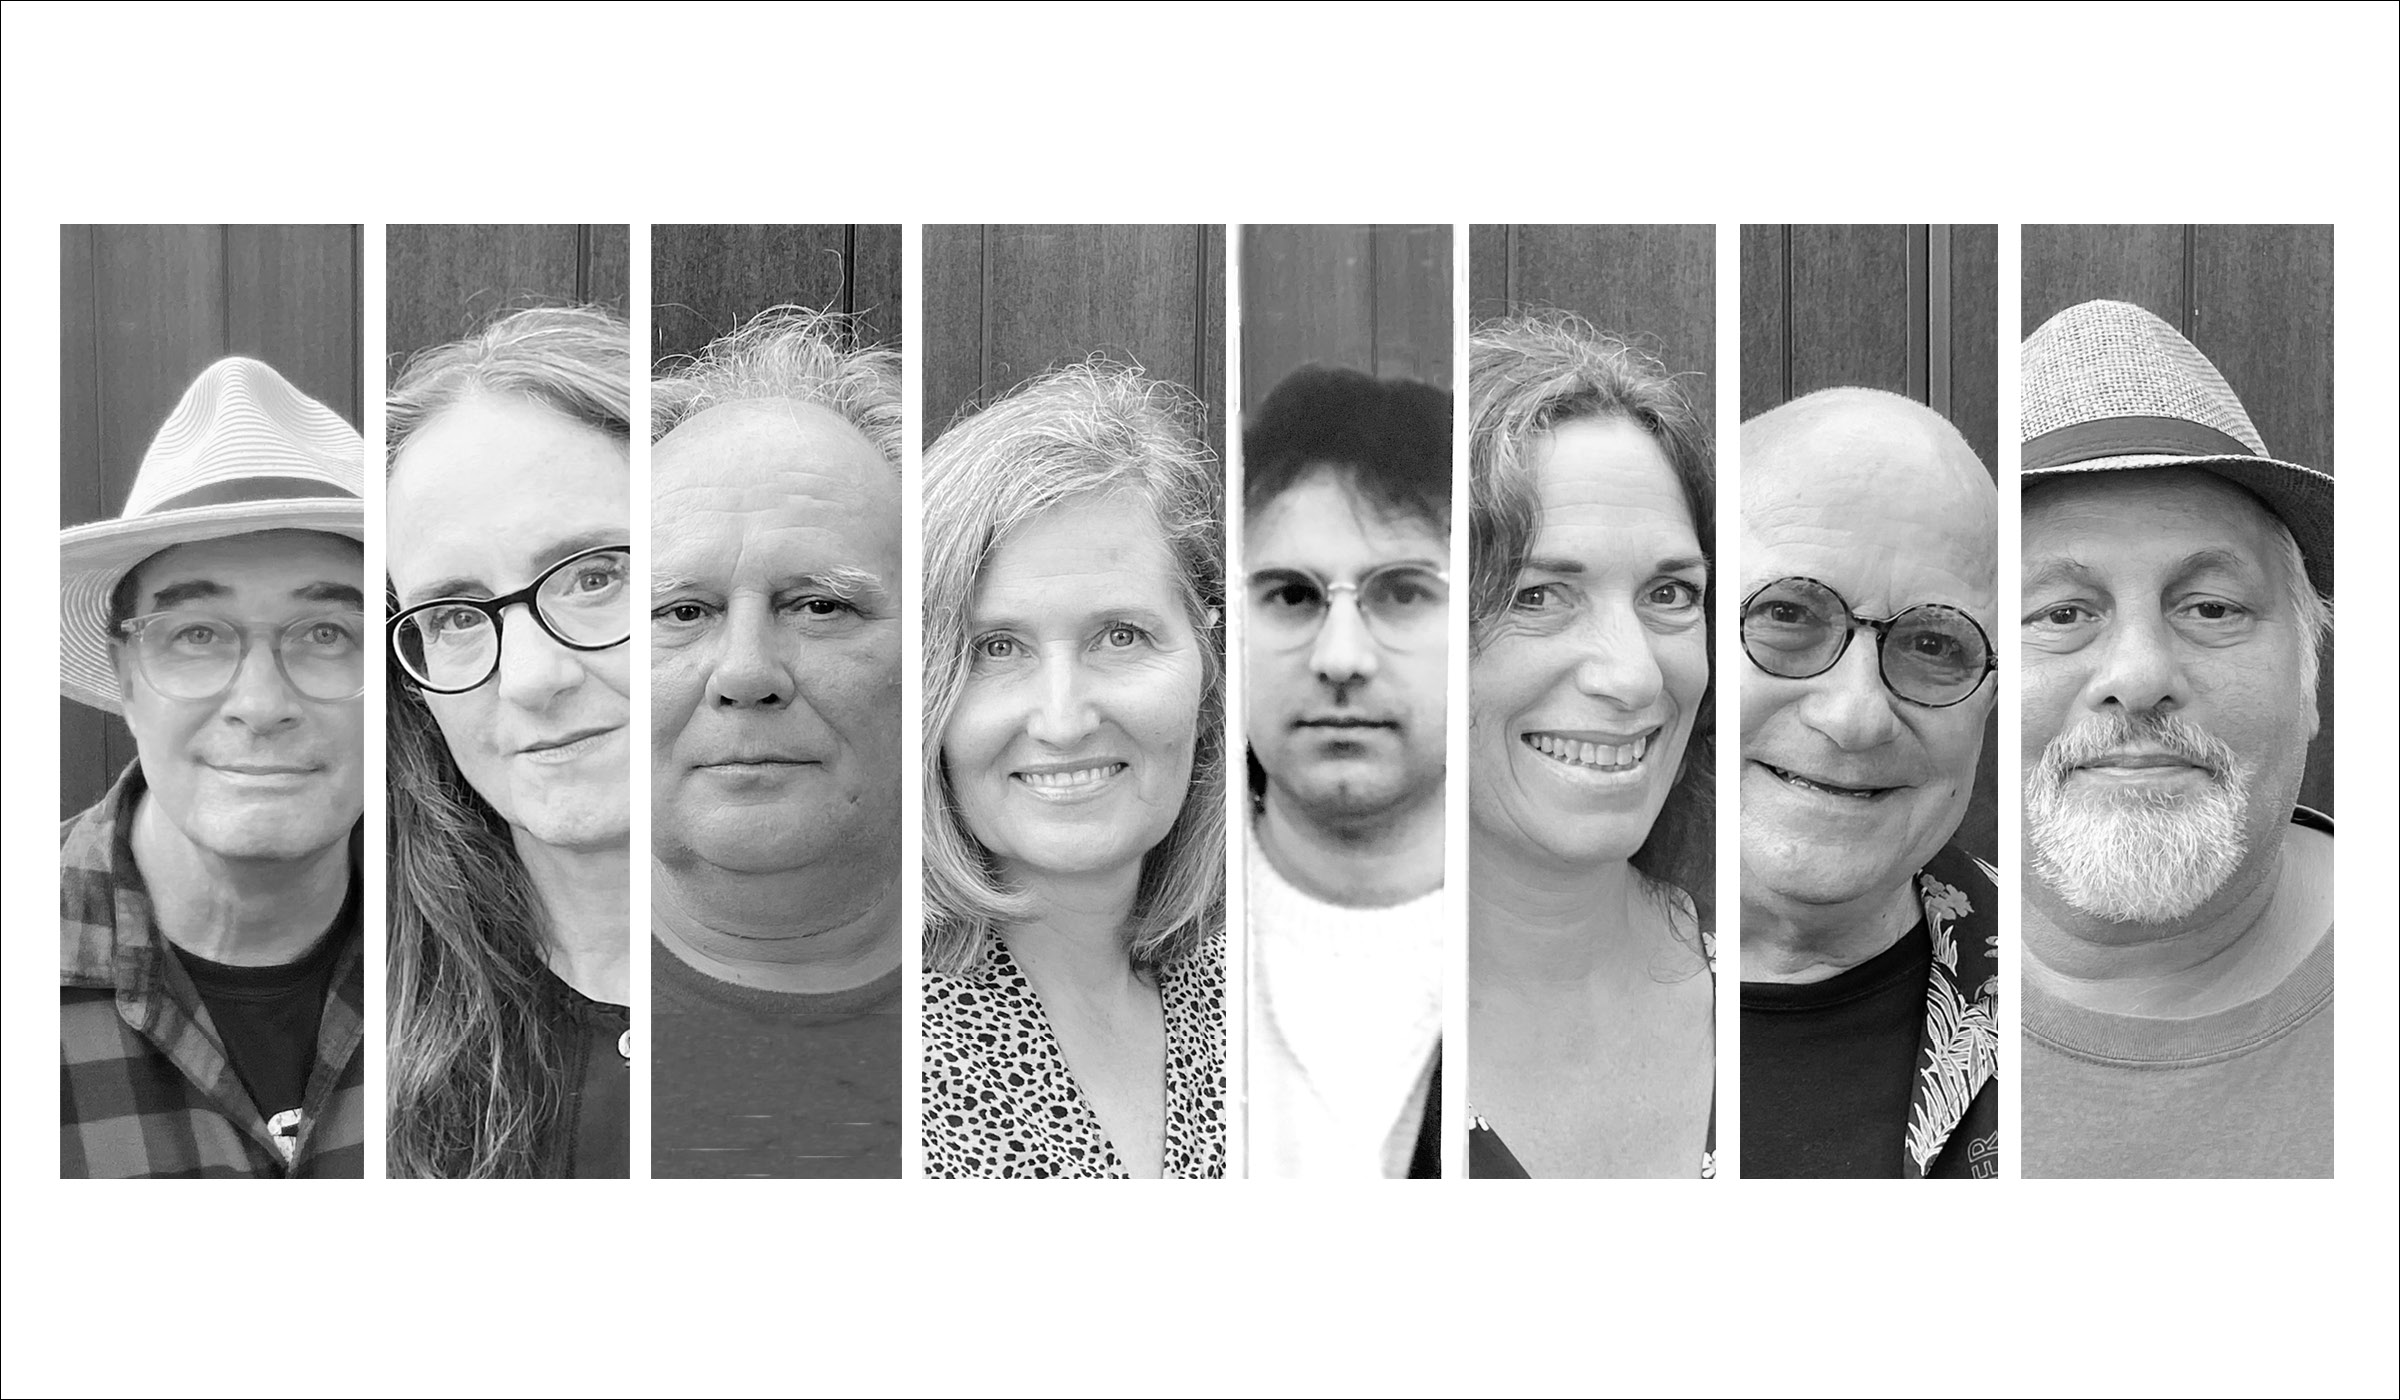 Black and white photo collage of the artist collective The Contemporaries